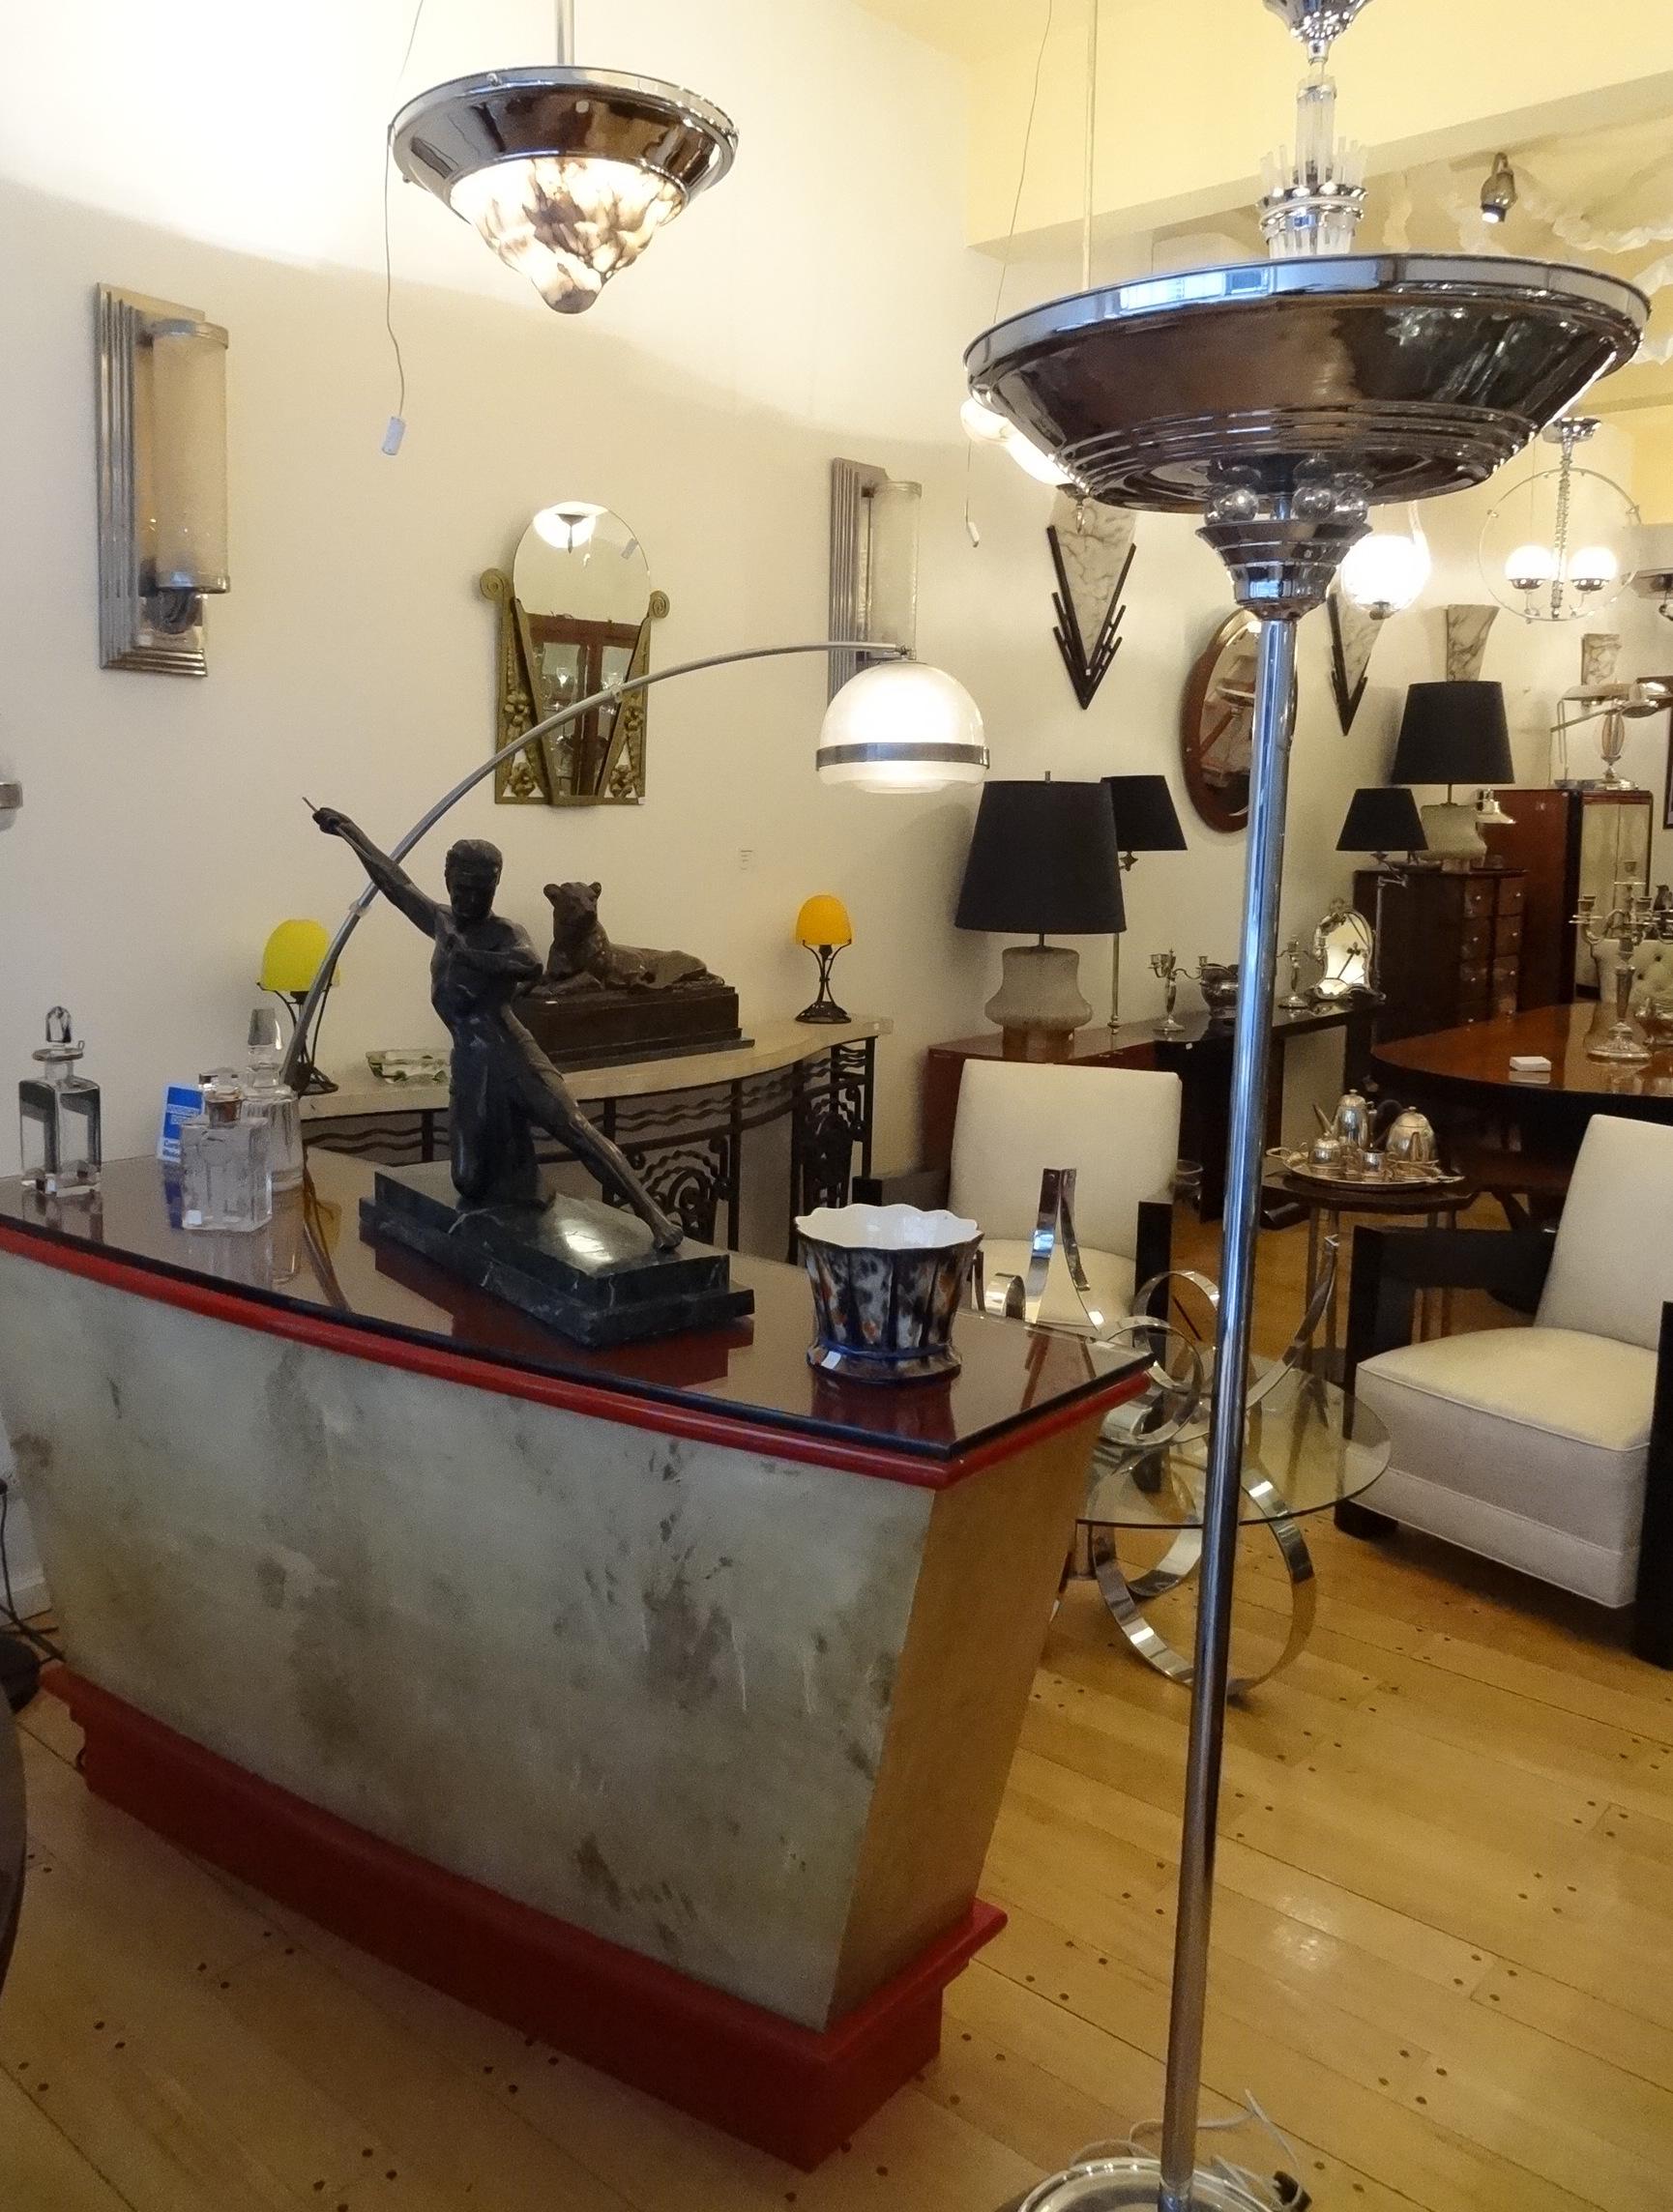 Floor lamp Art Deco

Materials: wood, glass, chrome.
France
1930
You want to live in the golden years, those are the floor lamps that your project needs.
We have specialized in the sale of Art Deco and Art Nouveau styles since 1982.
Pushing the